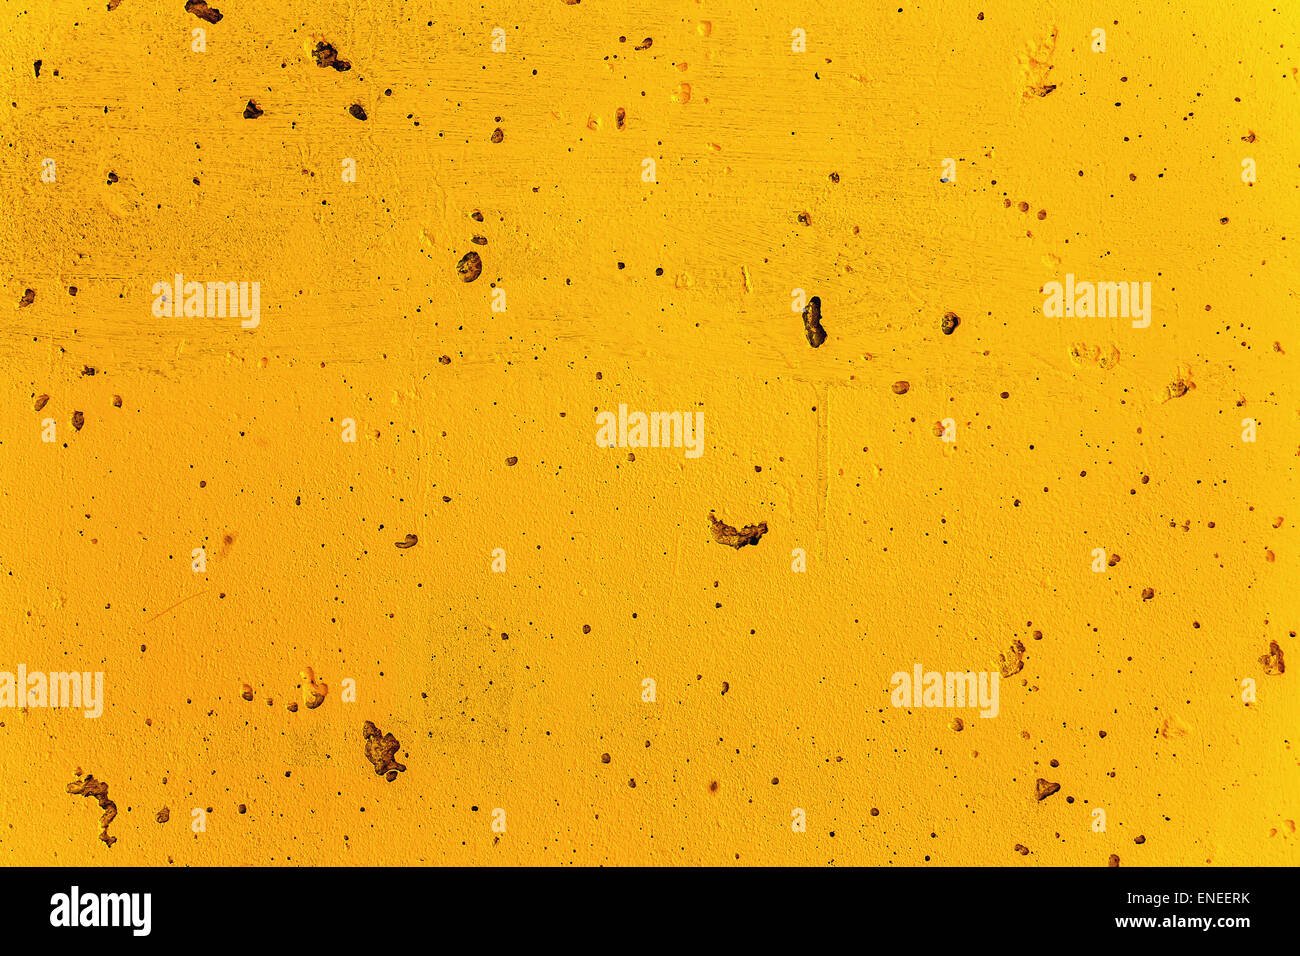 Grunge plaster cement or concrete wall texture yellow color Stock Photo